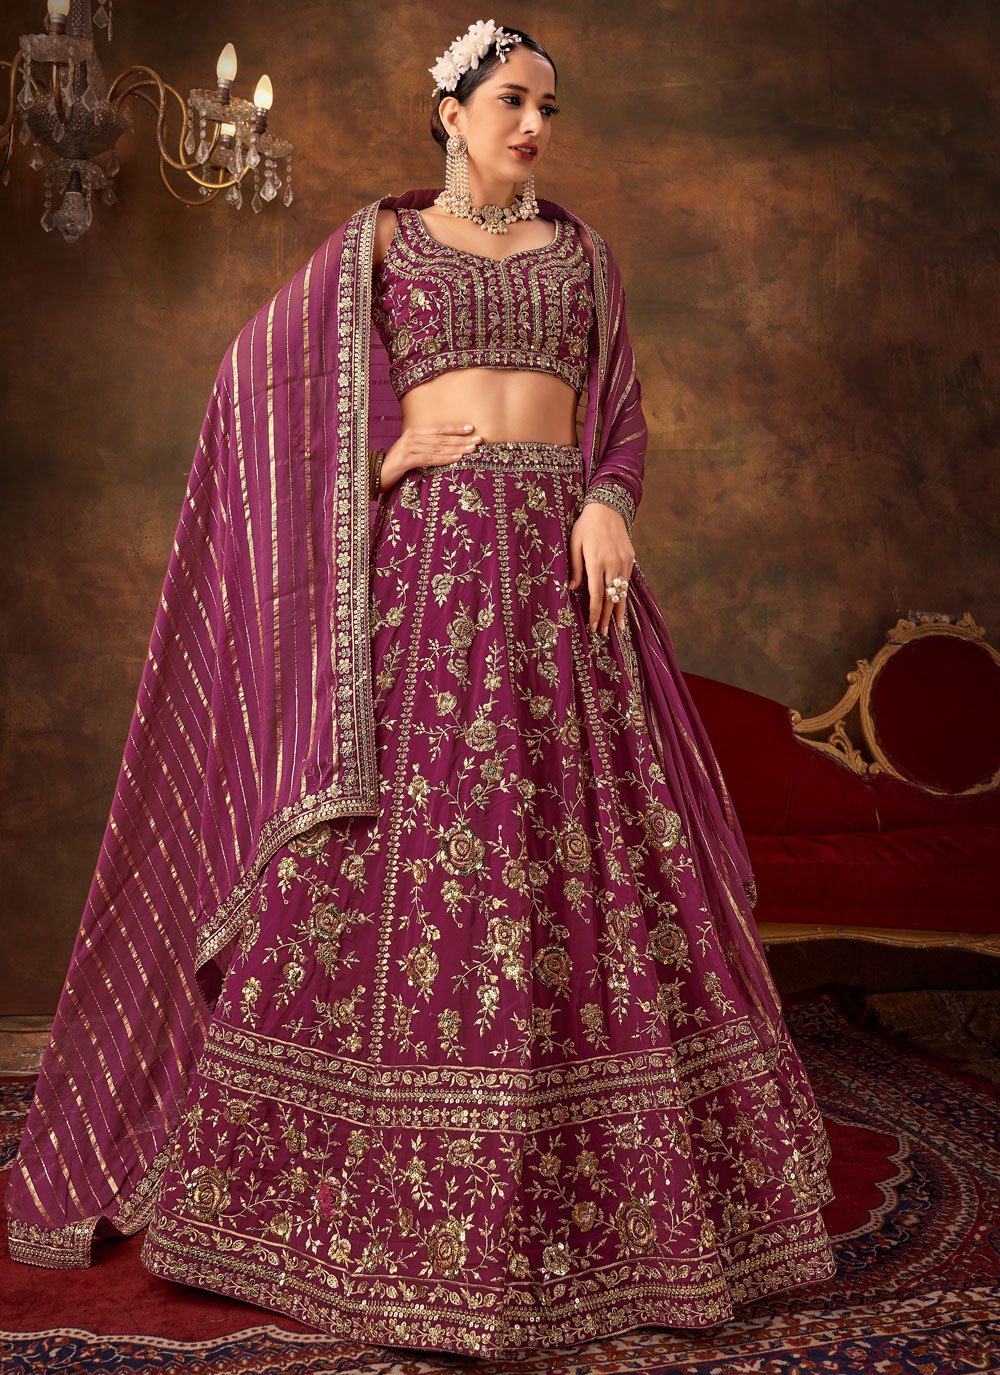 Purple Bridal Lehengas Taking Over The Red And How | Bride clothes, Bridal,  Fashion romper